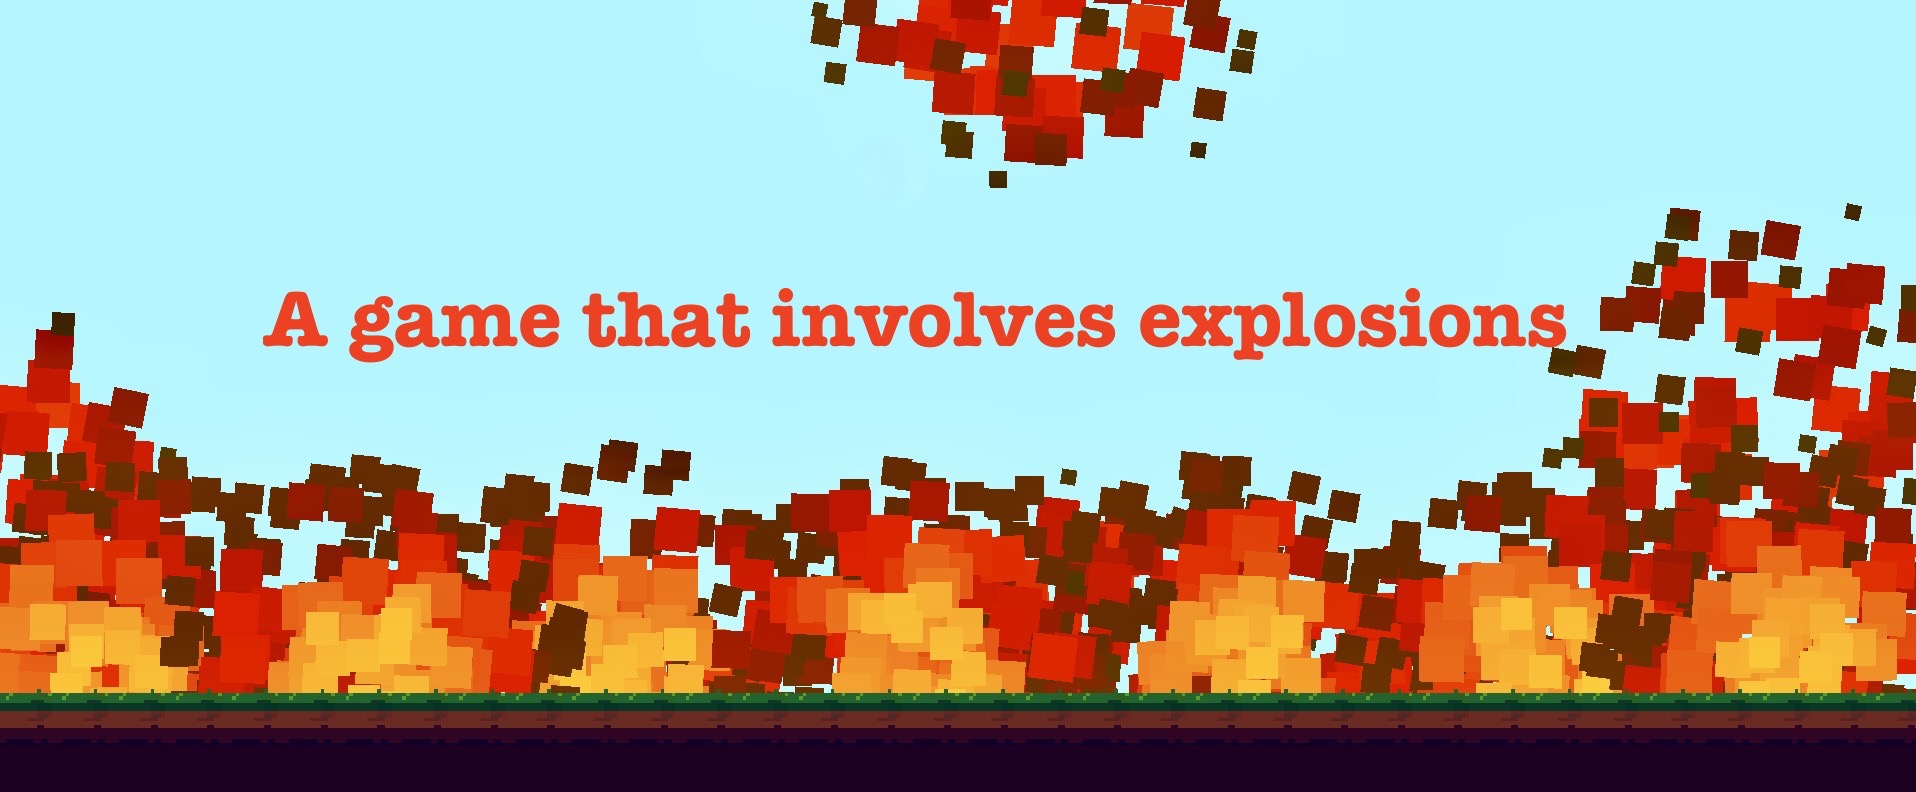 A game that involves explosions